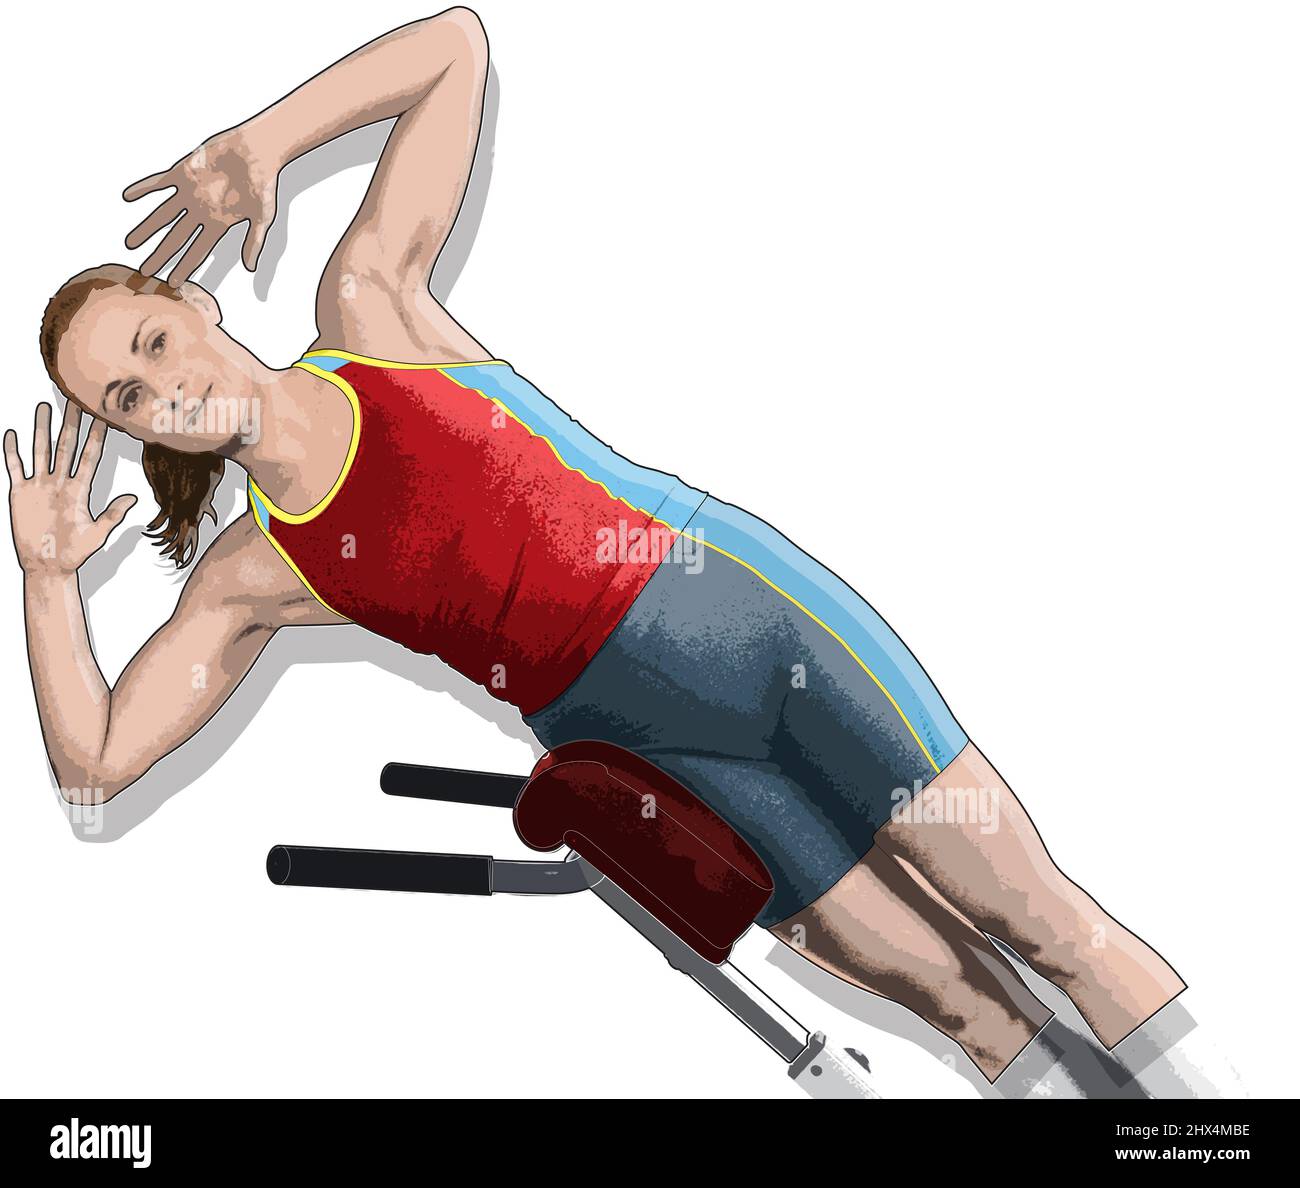 Woman performing side stretch exercise Stock Photo